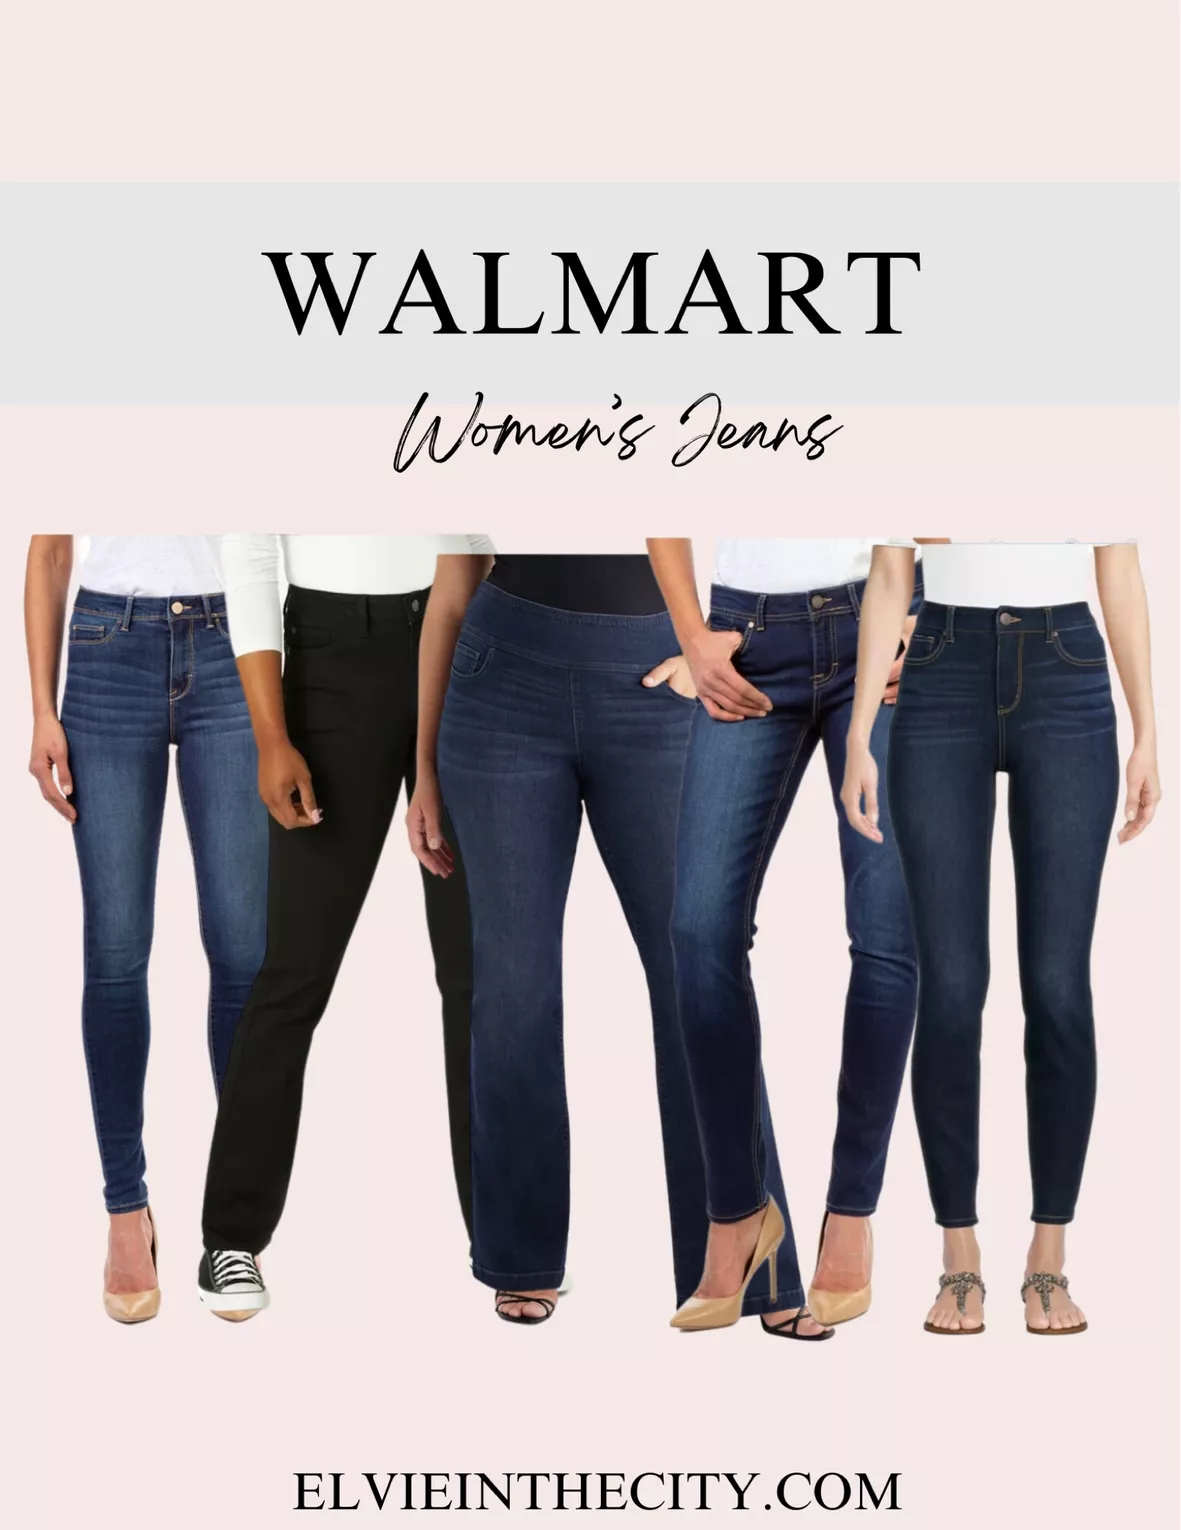 High Waisted Jeans Outfits for Every Body Type